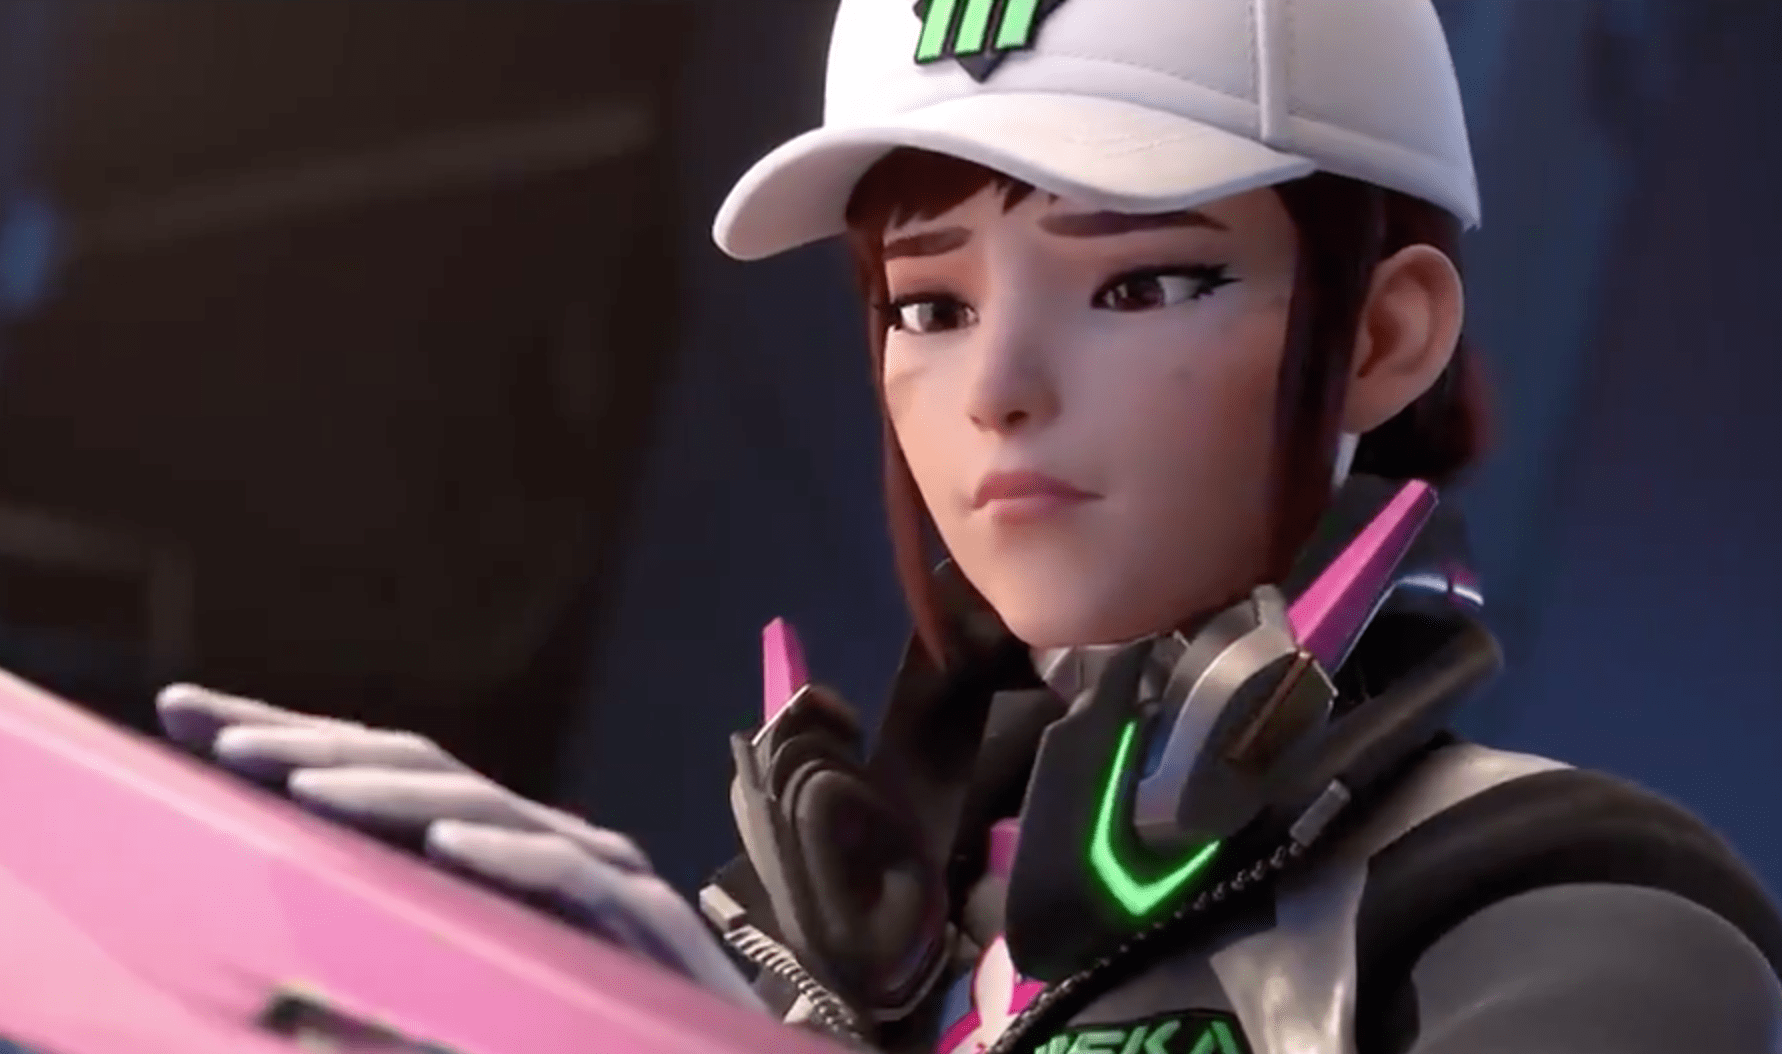 Overwatch's latest animated short "Shooting Star" delivers D.Va and her mech in action